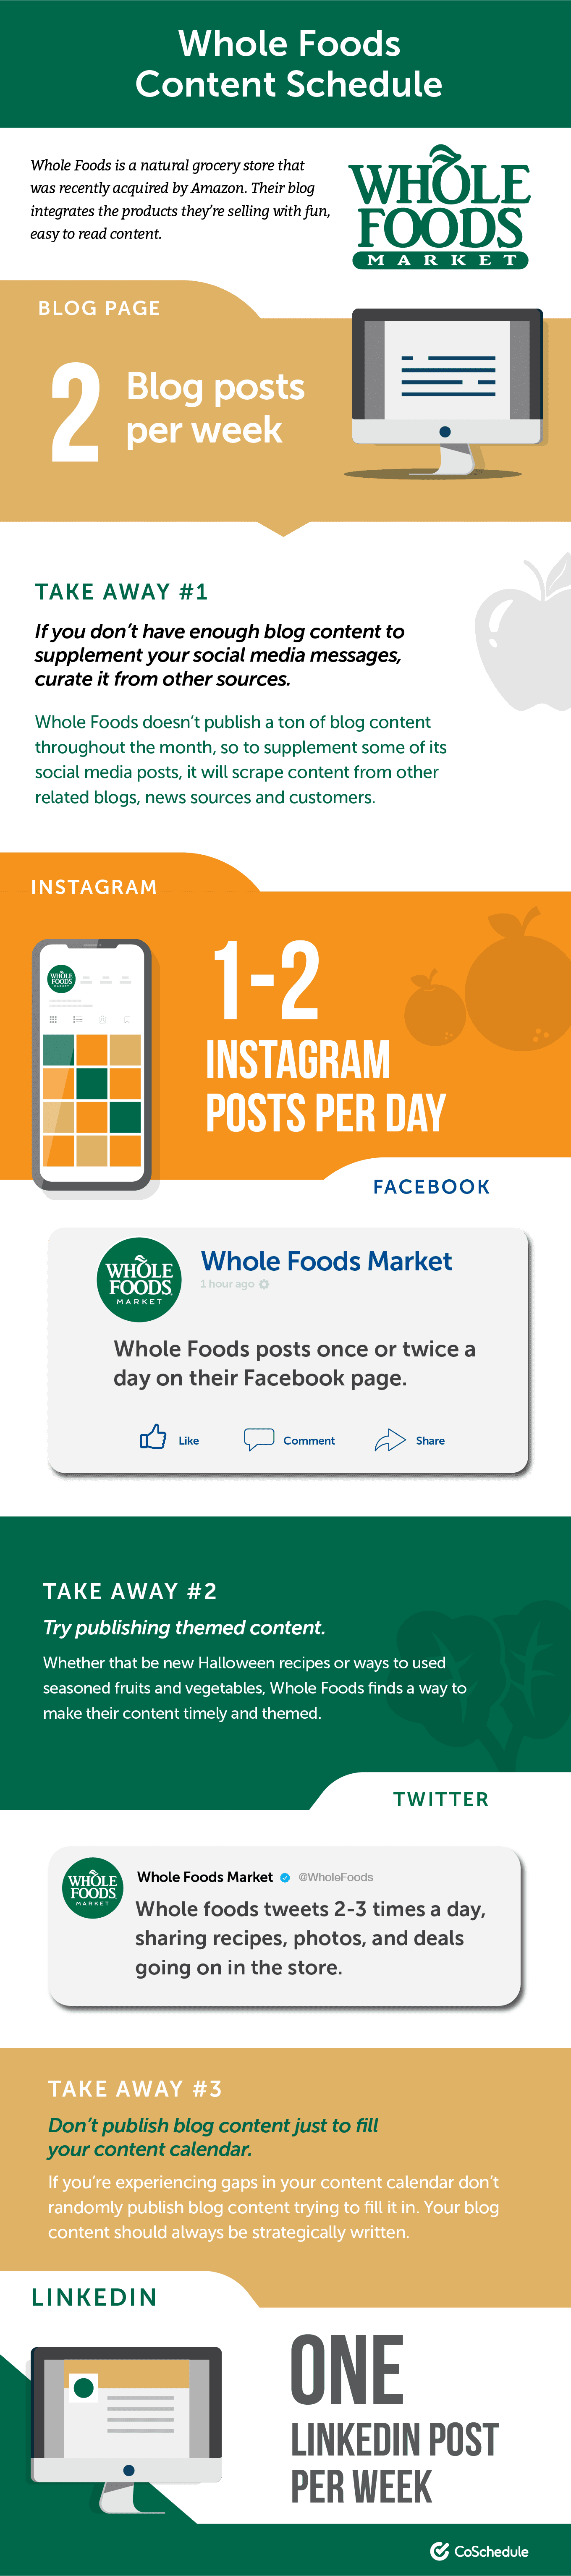 Whole Foods content schema